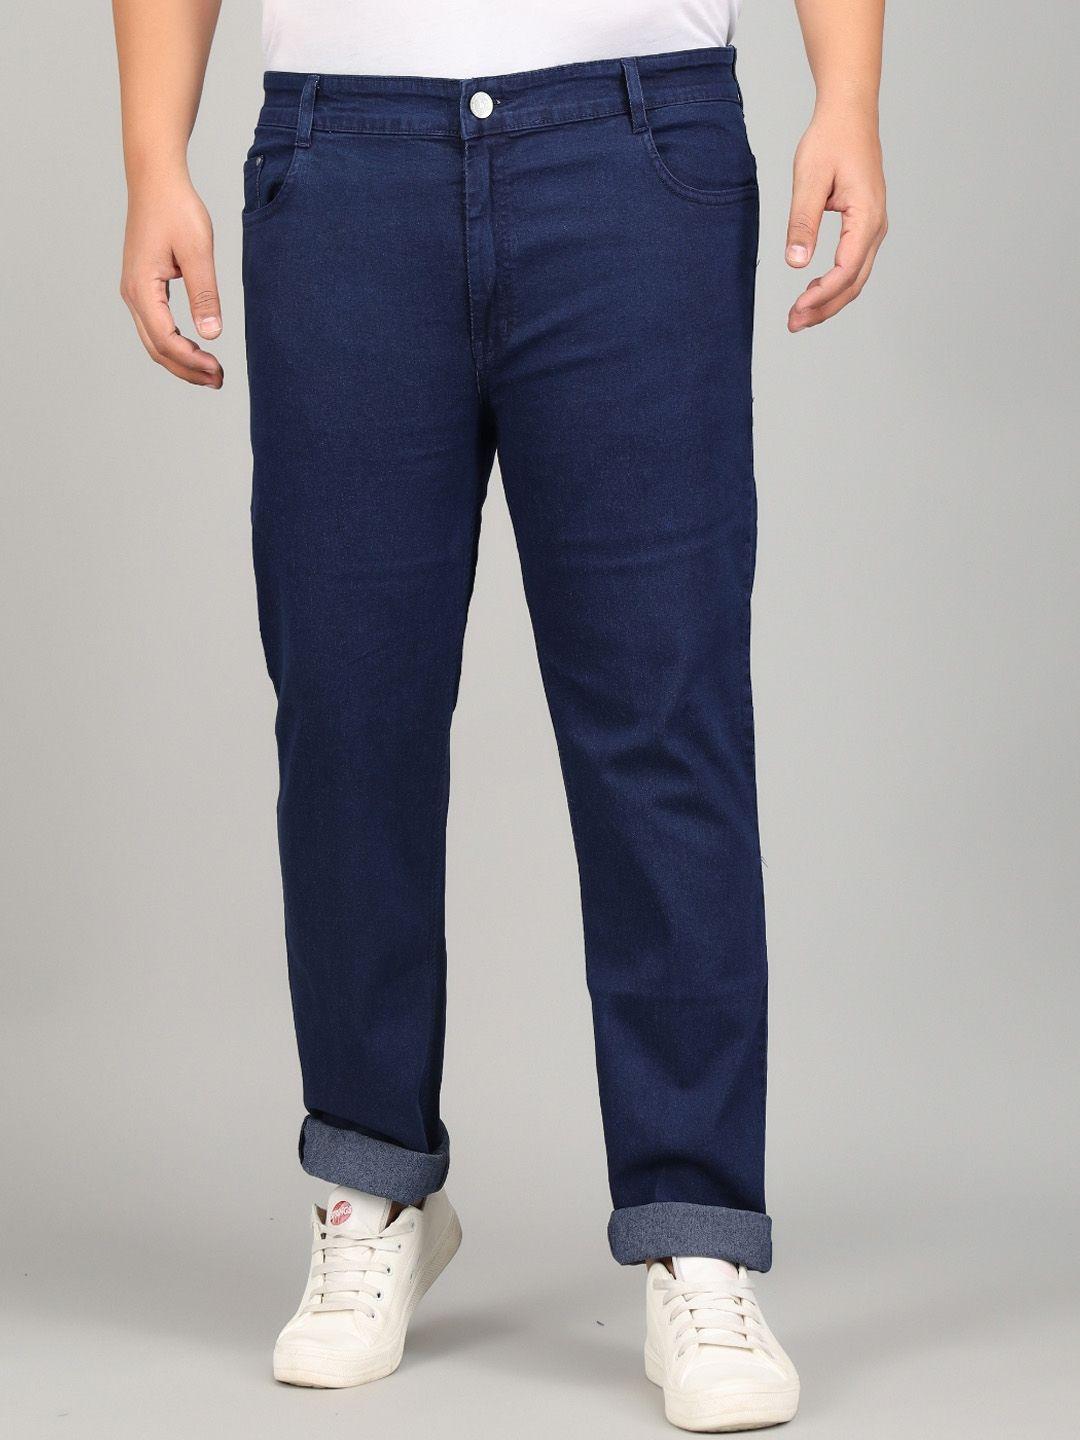 studio-nexx-men-relaxed-fit-clean-look-stretchable-jeans